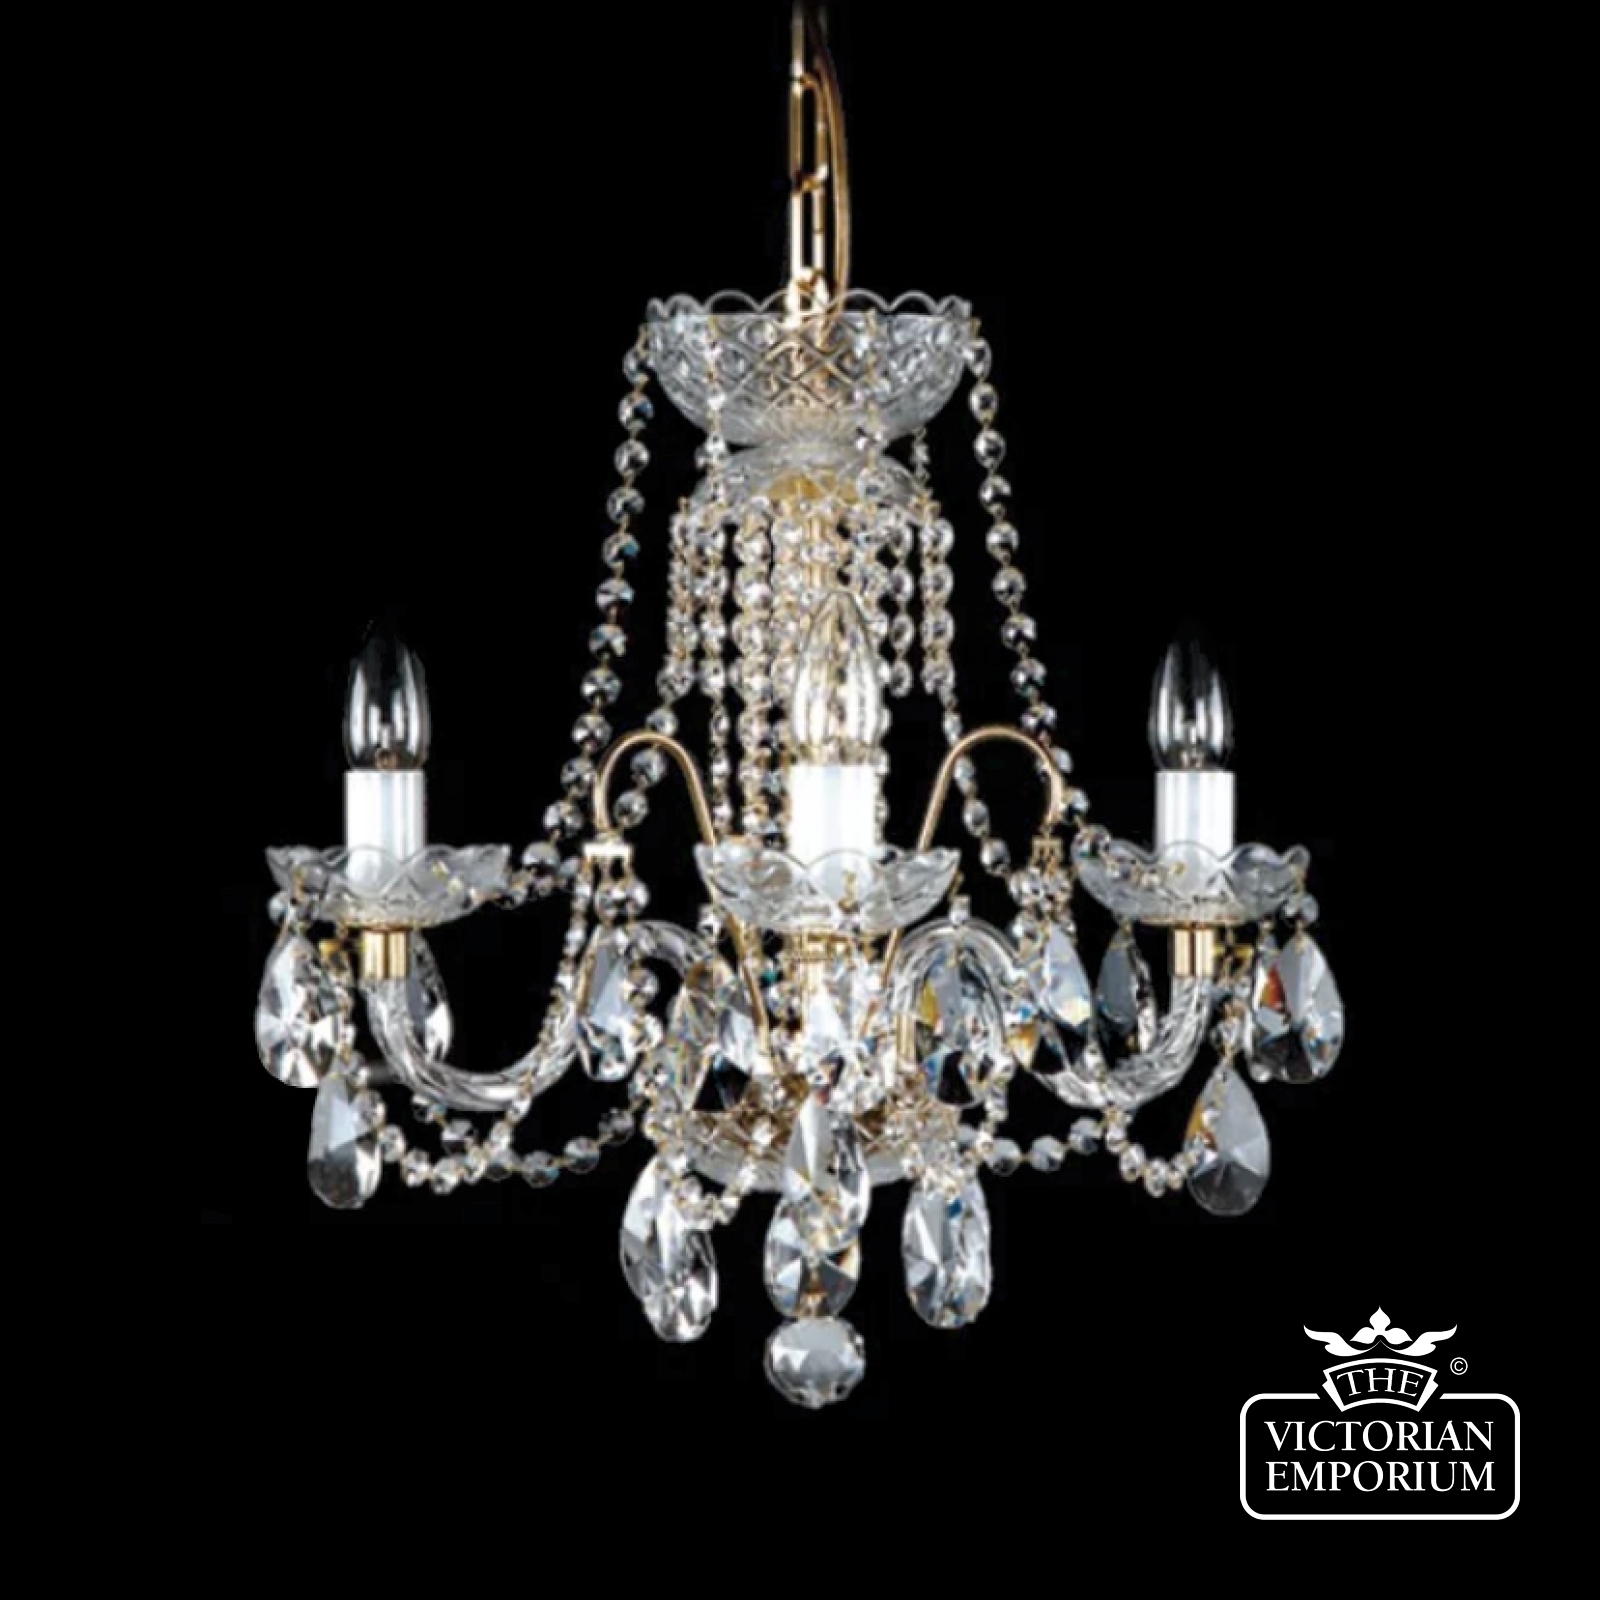 Small And Delicate 5 Arm Lead Crystal Chandelier